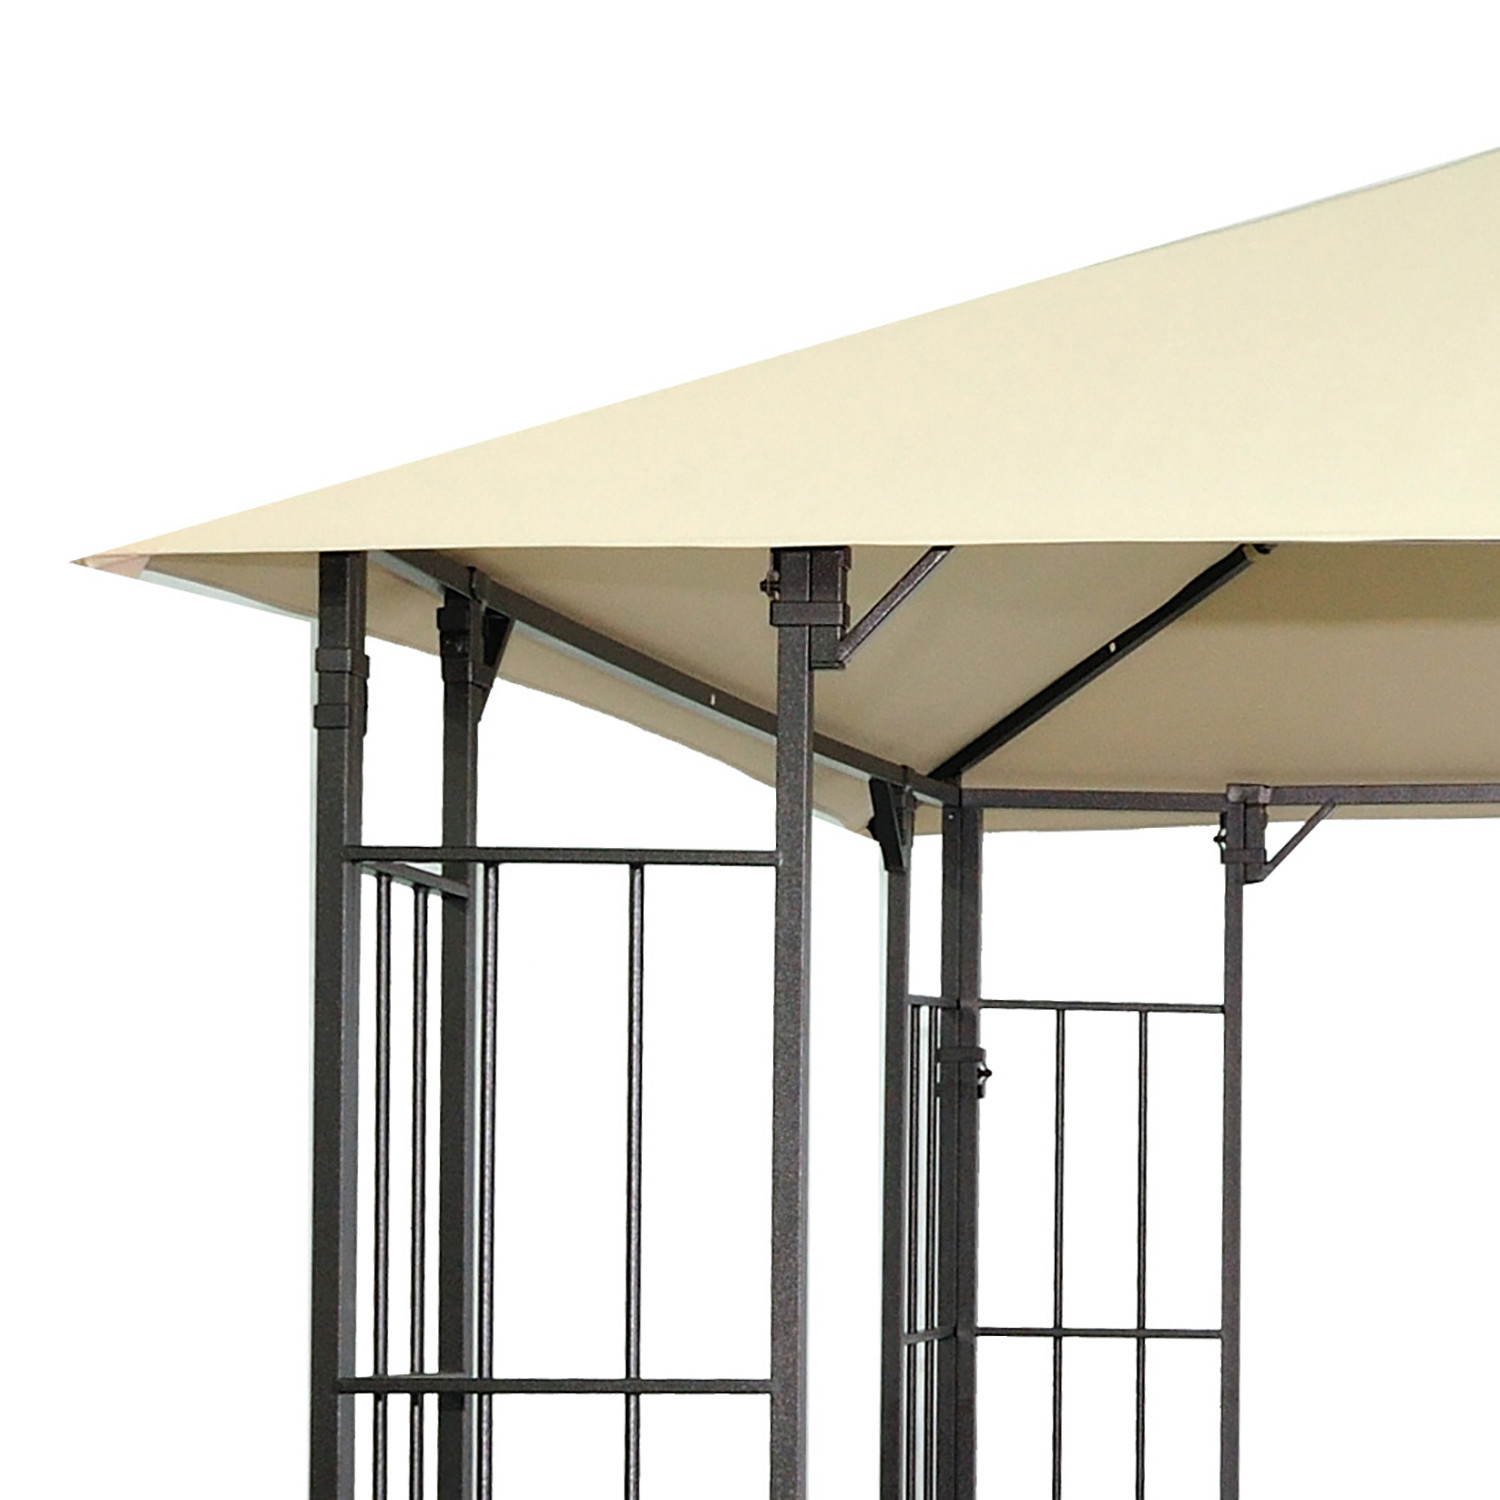 Athens 3 x 3m Gazebo Canopy Replacement Image 5